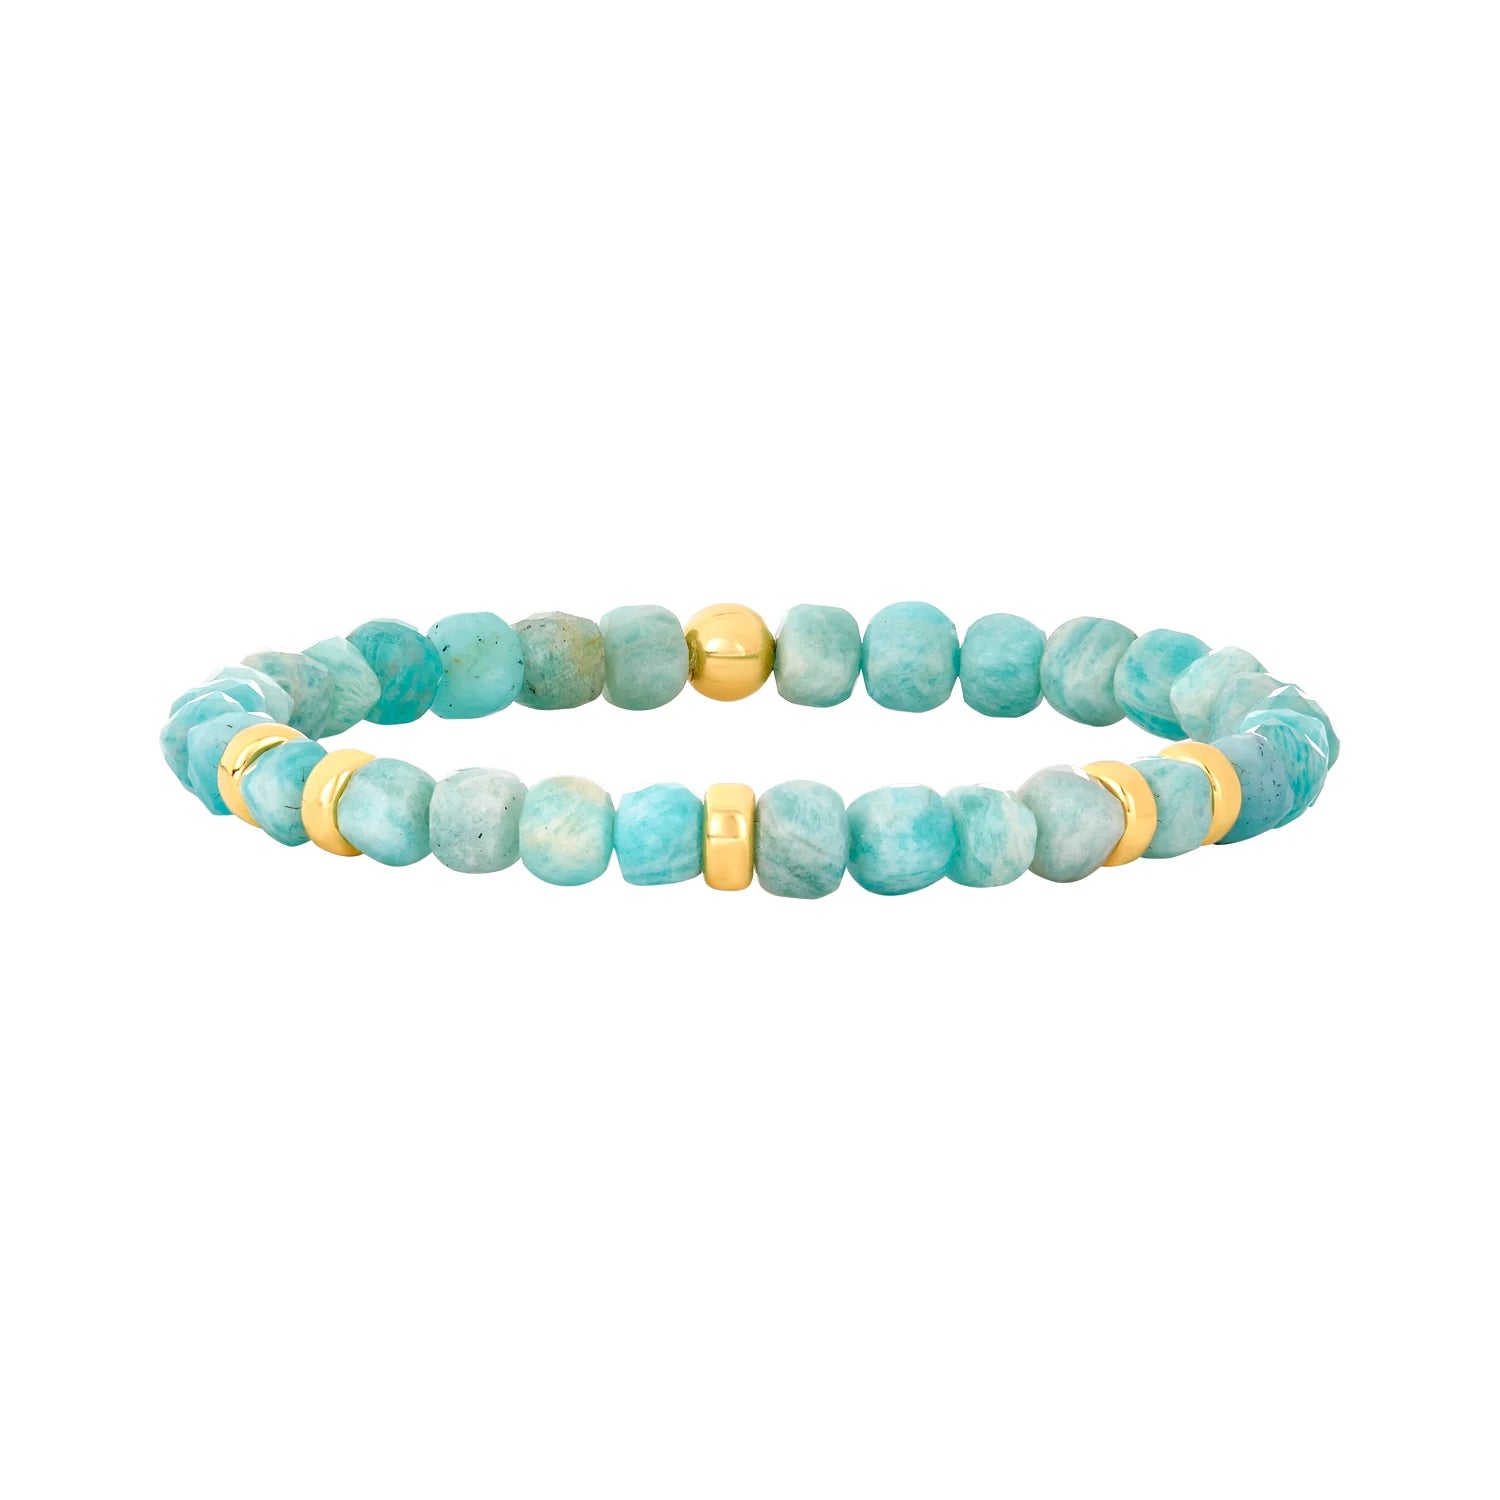 5mm Amazonite and Gold Rondelle Pattern Bead Bracelet